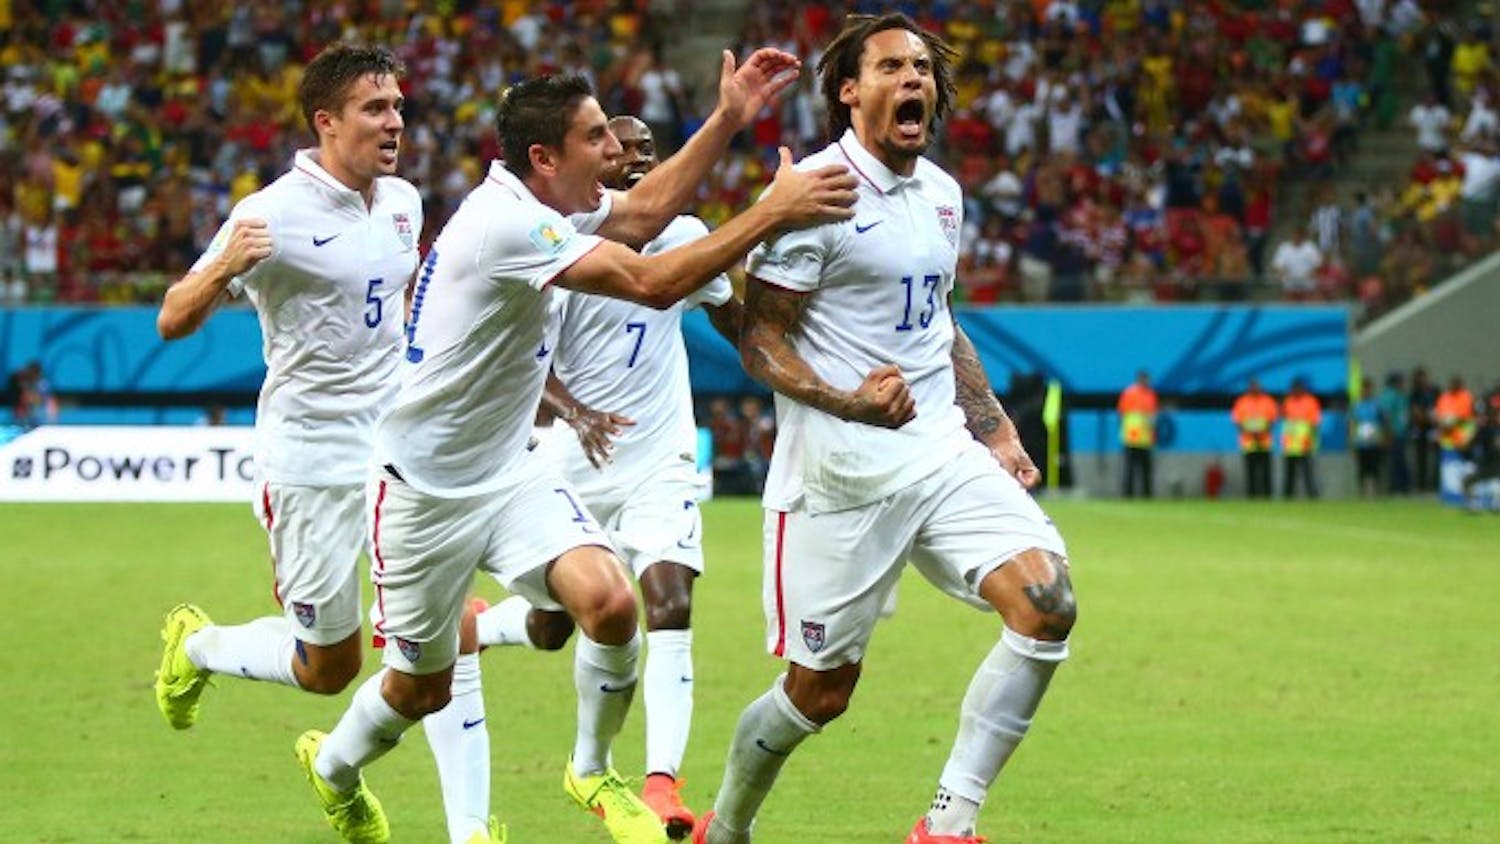 Jun 22, 2014; Manaus, Amazonas, BRAZIL; USA midfielder Jermaine Jones	(13) celebrates with teammates after scoring a second half goal against Portugal during the 2014 World Cup at Arena Amazonia. Mandatory Credit: Mark J. Rebilas-USA TODAY Sports